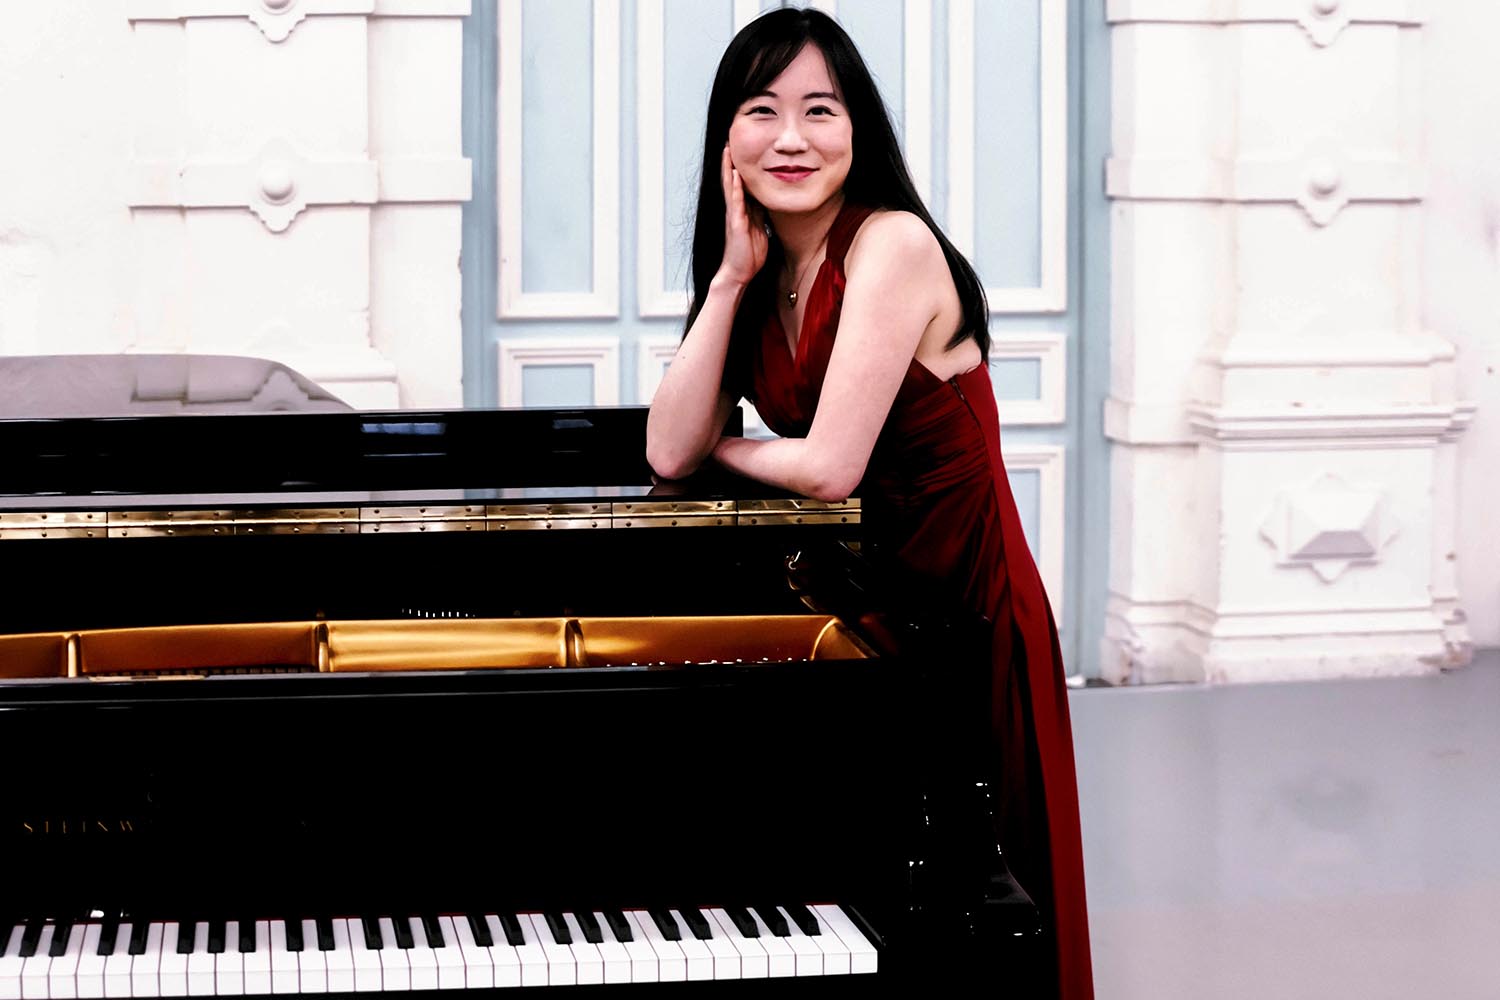 A woman wearing a red dress stands by a piano smiling